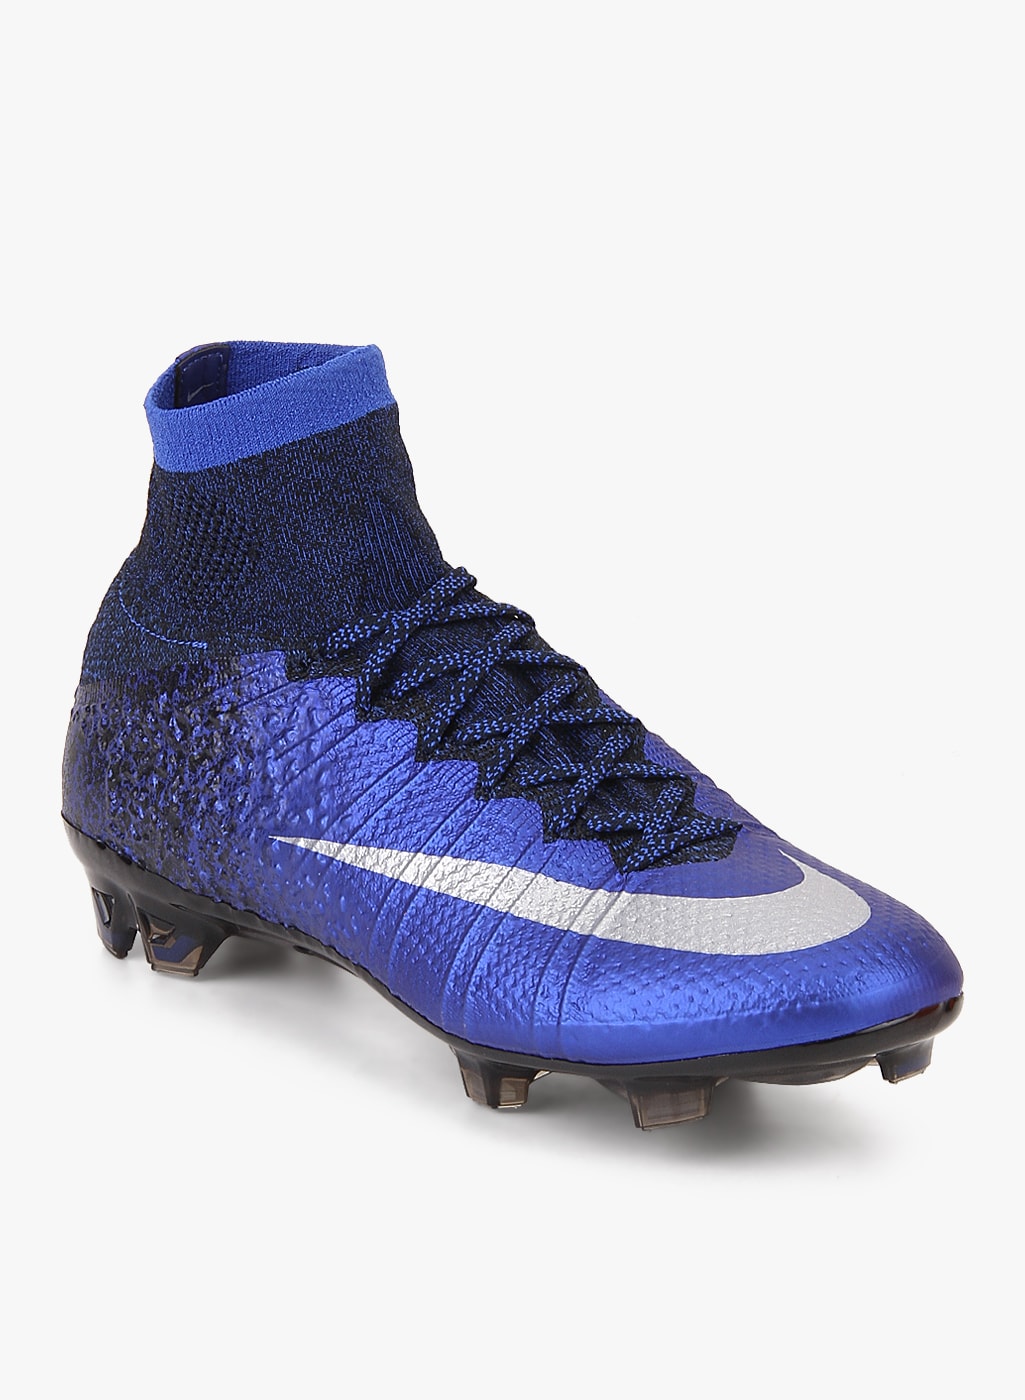 Nike Mercurial Superfly Limited Edition What The Mercurial